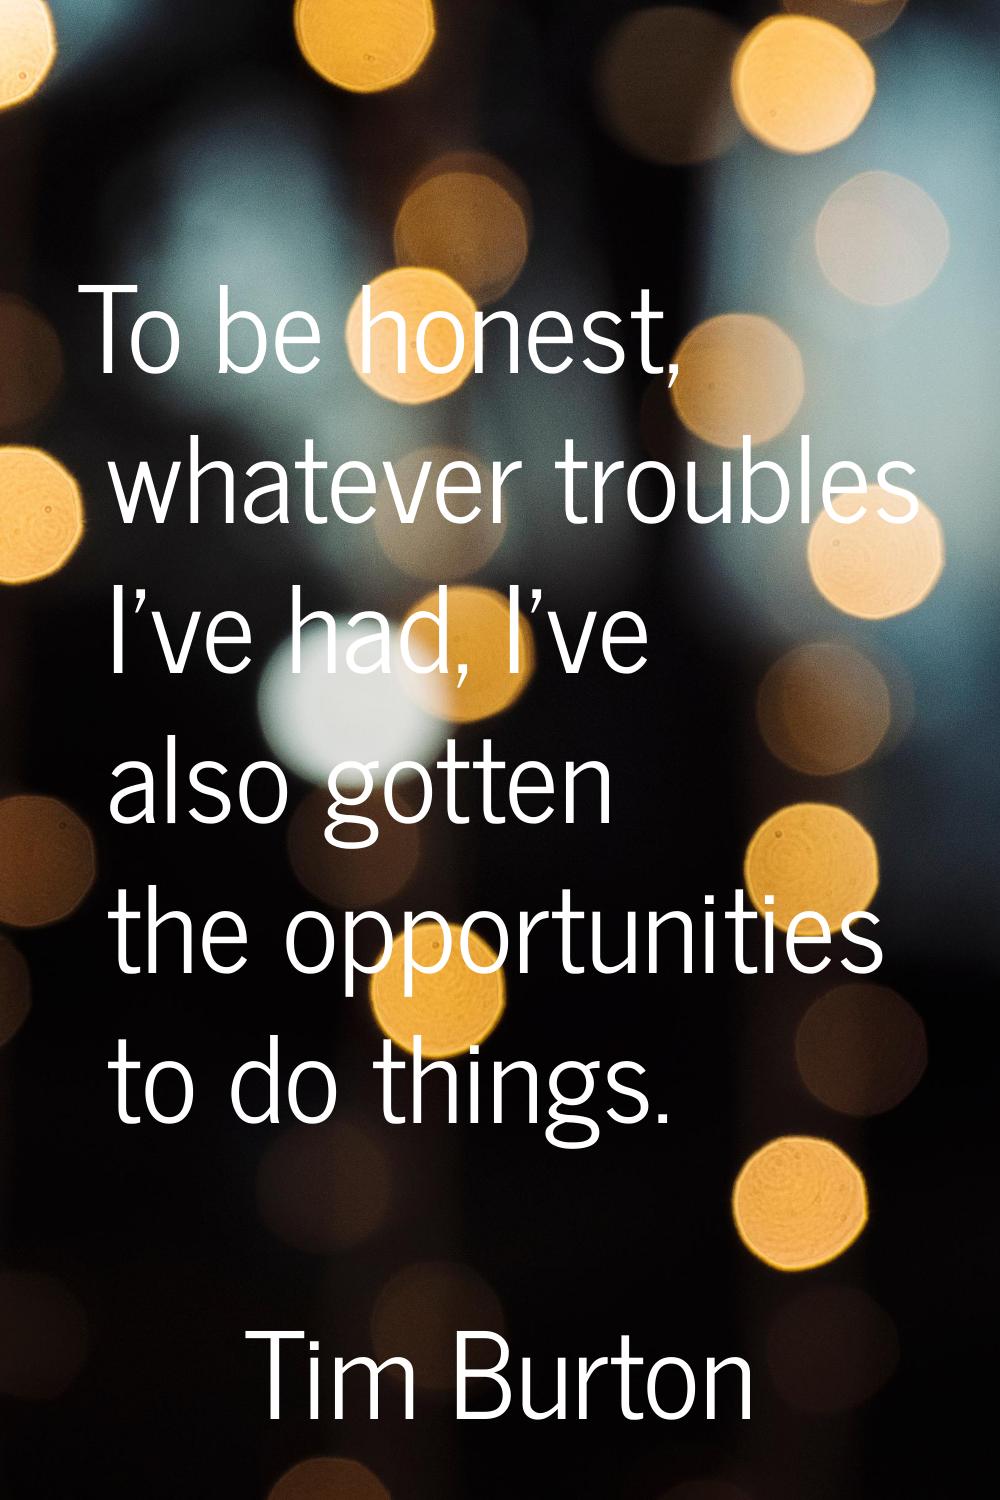 To be honest, whatever troubles I've had, I've also gotten the opportunities to do things.